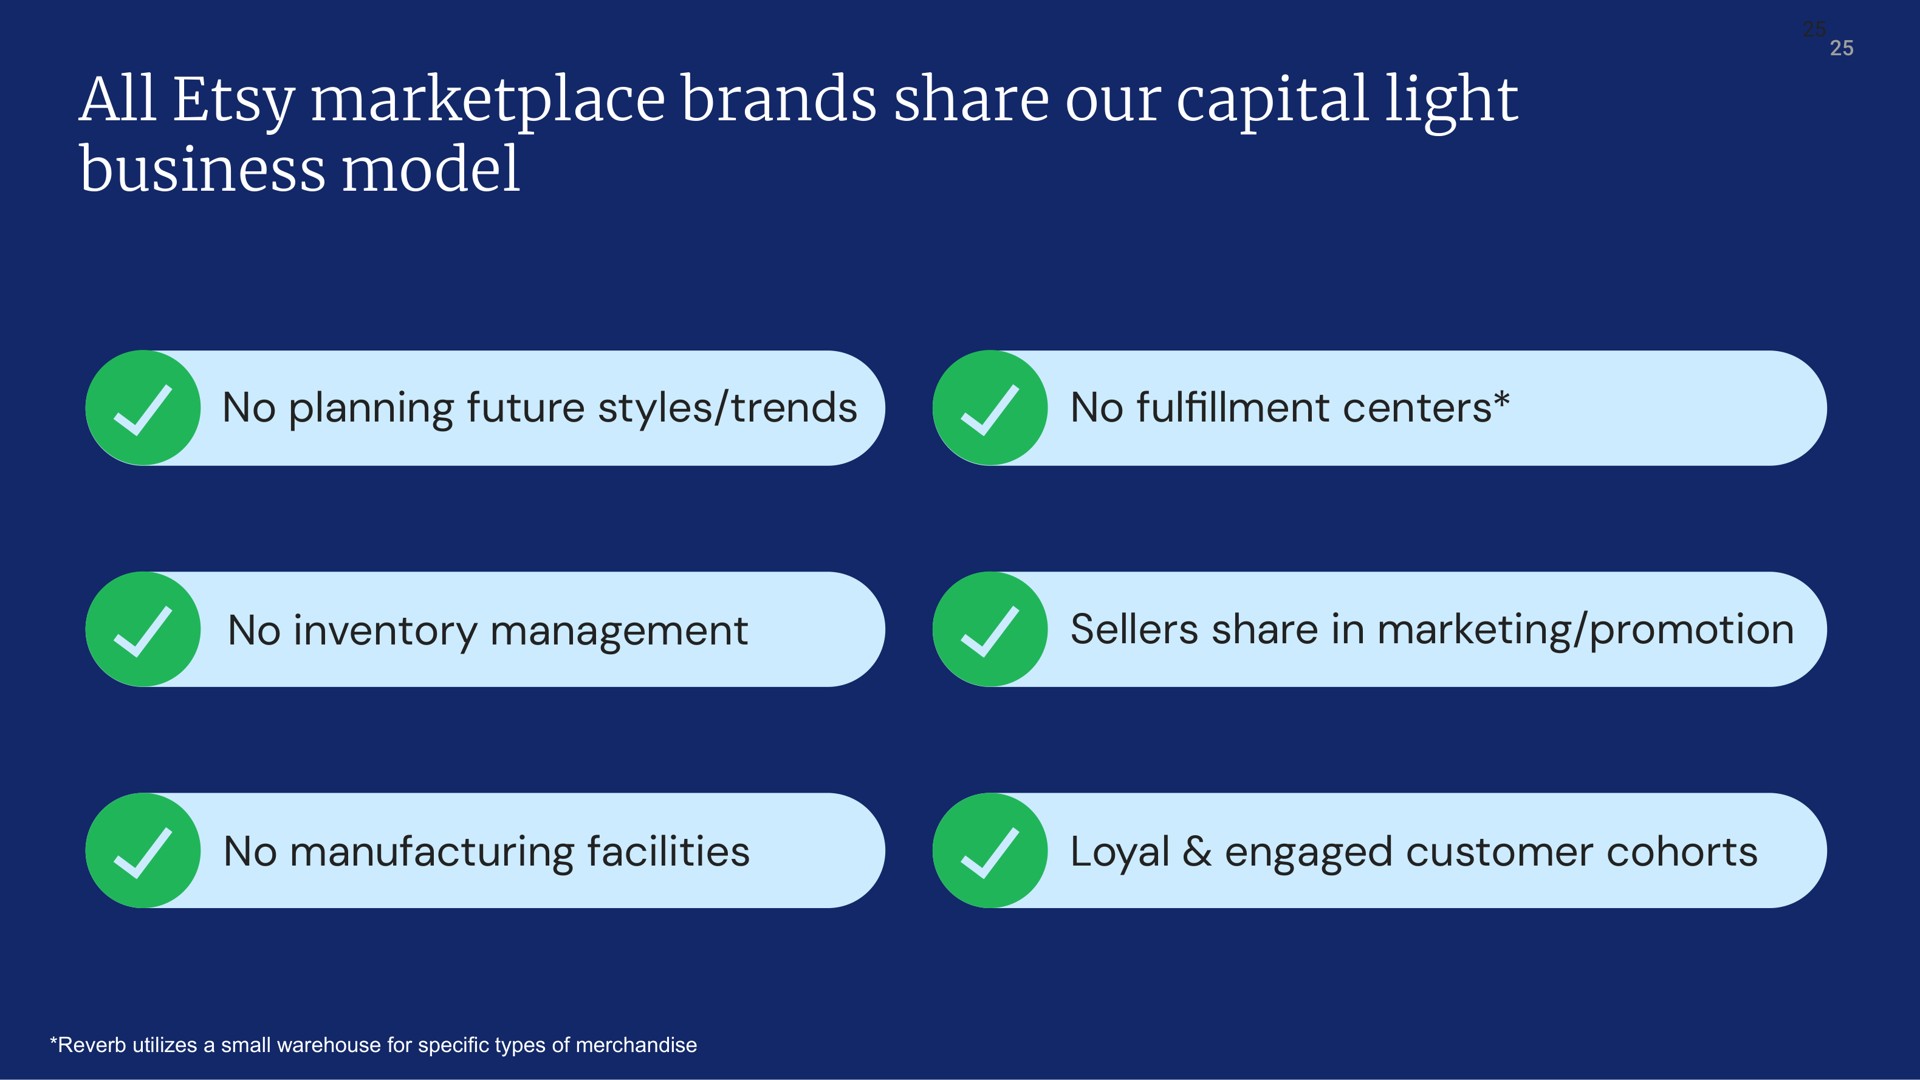 all brands share our capital light business model | Etsy